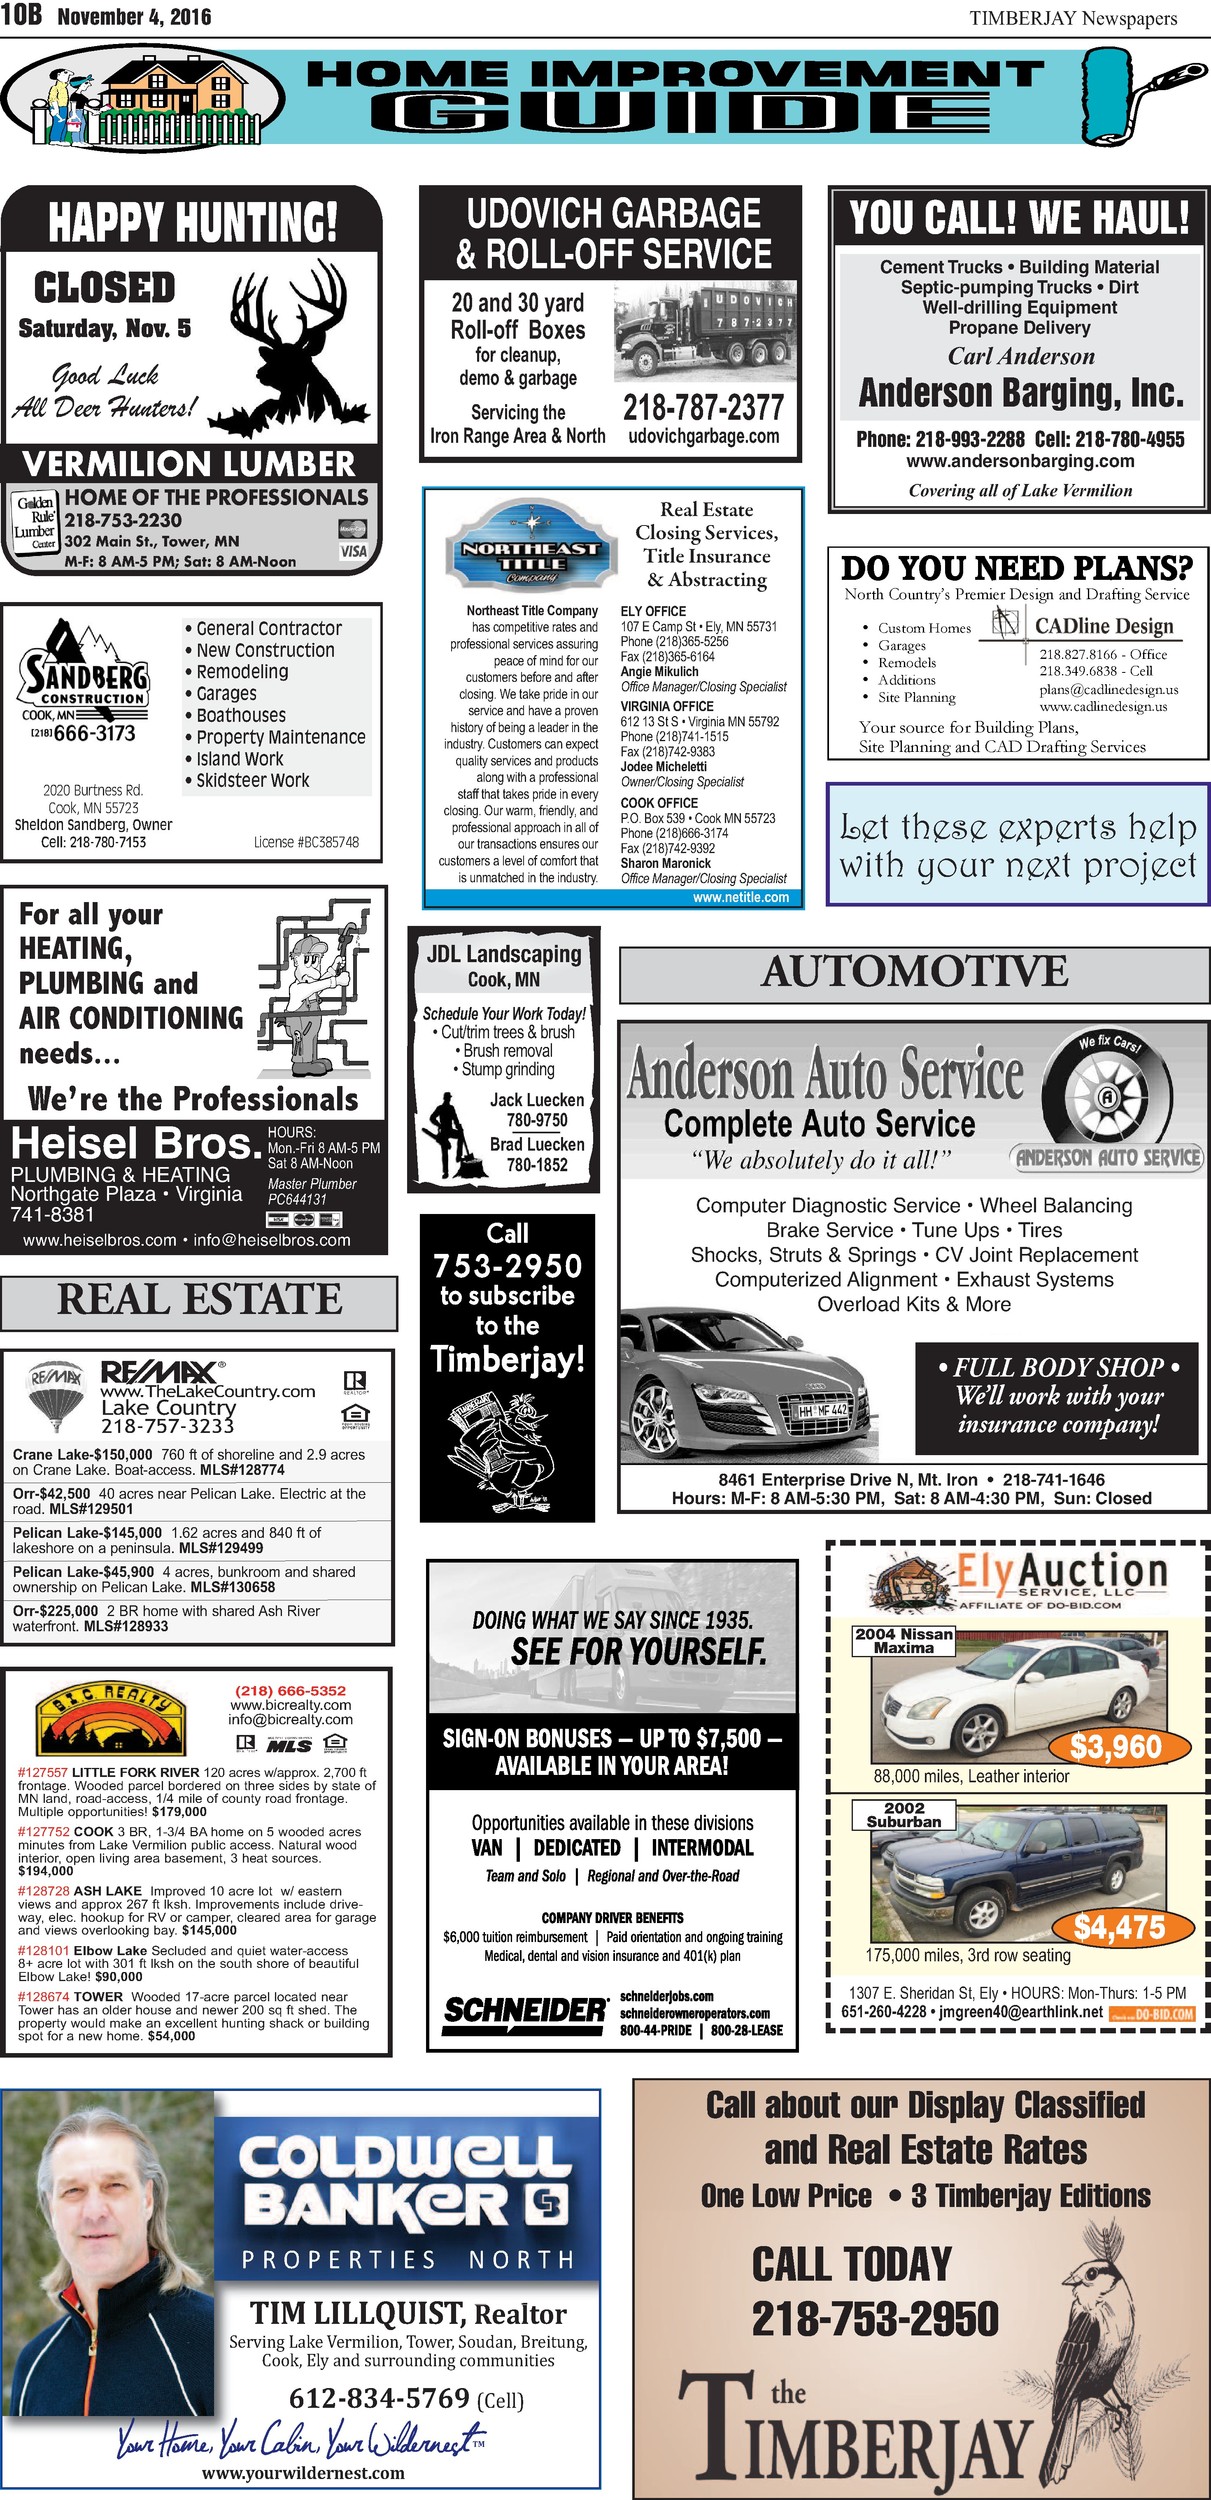 Click here to view the legal notices and classifieds from page B10